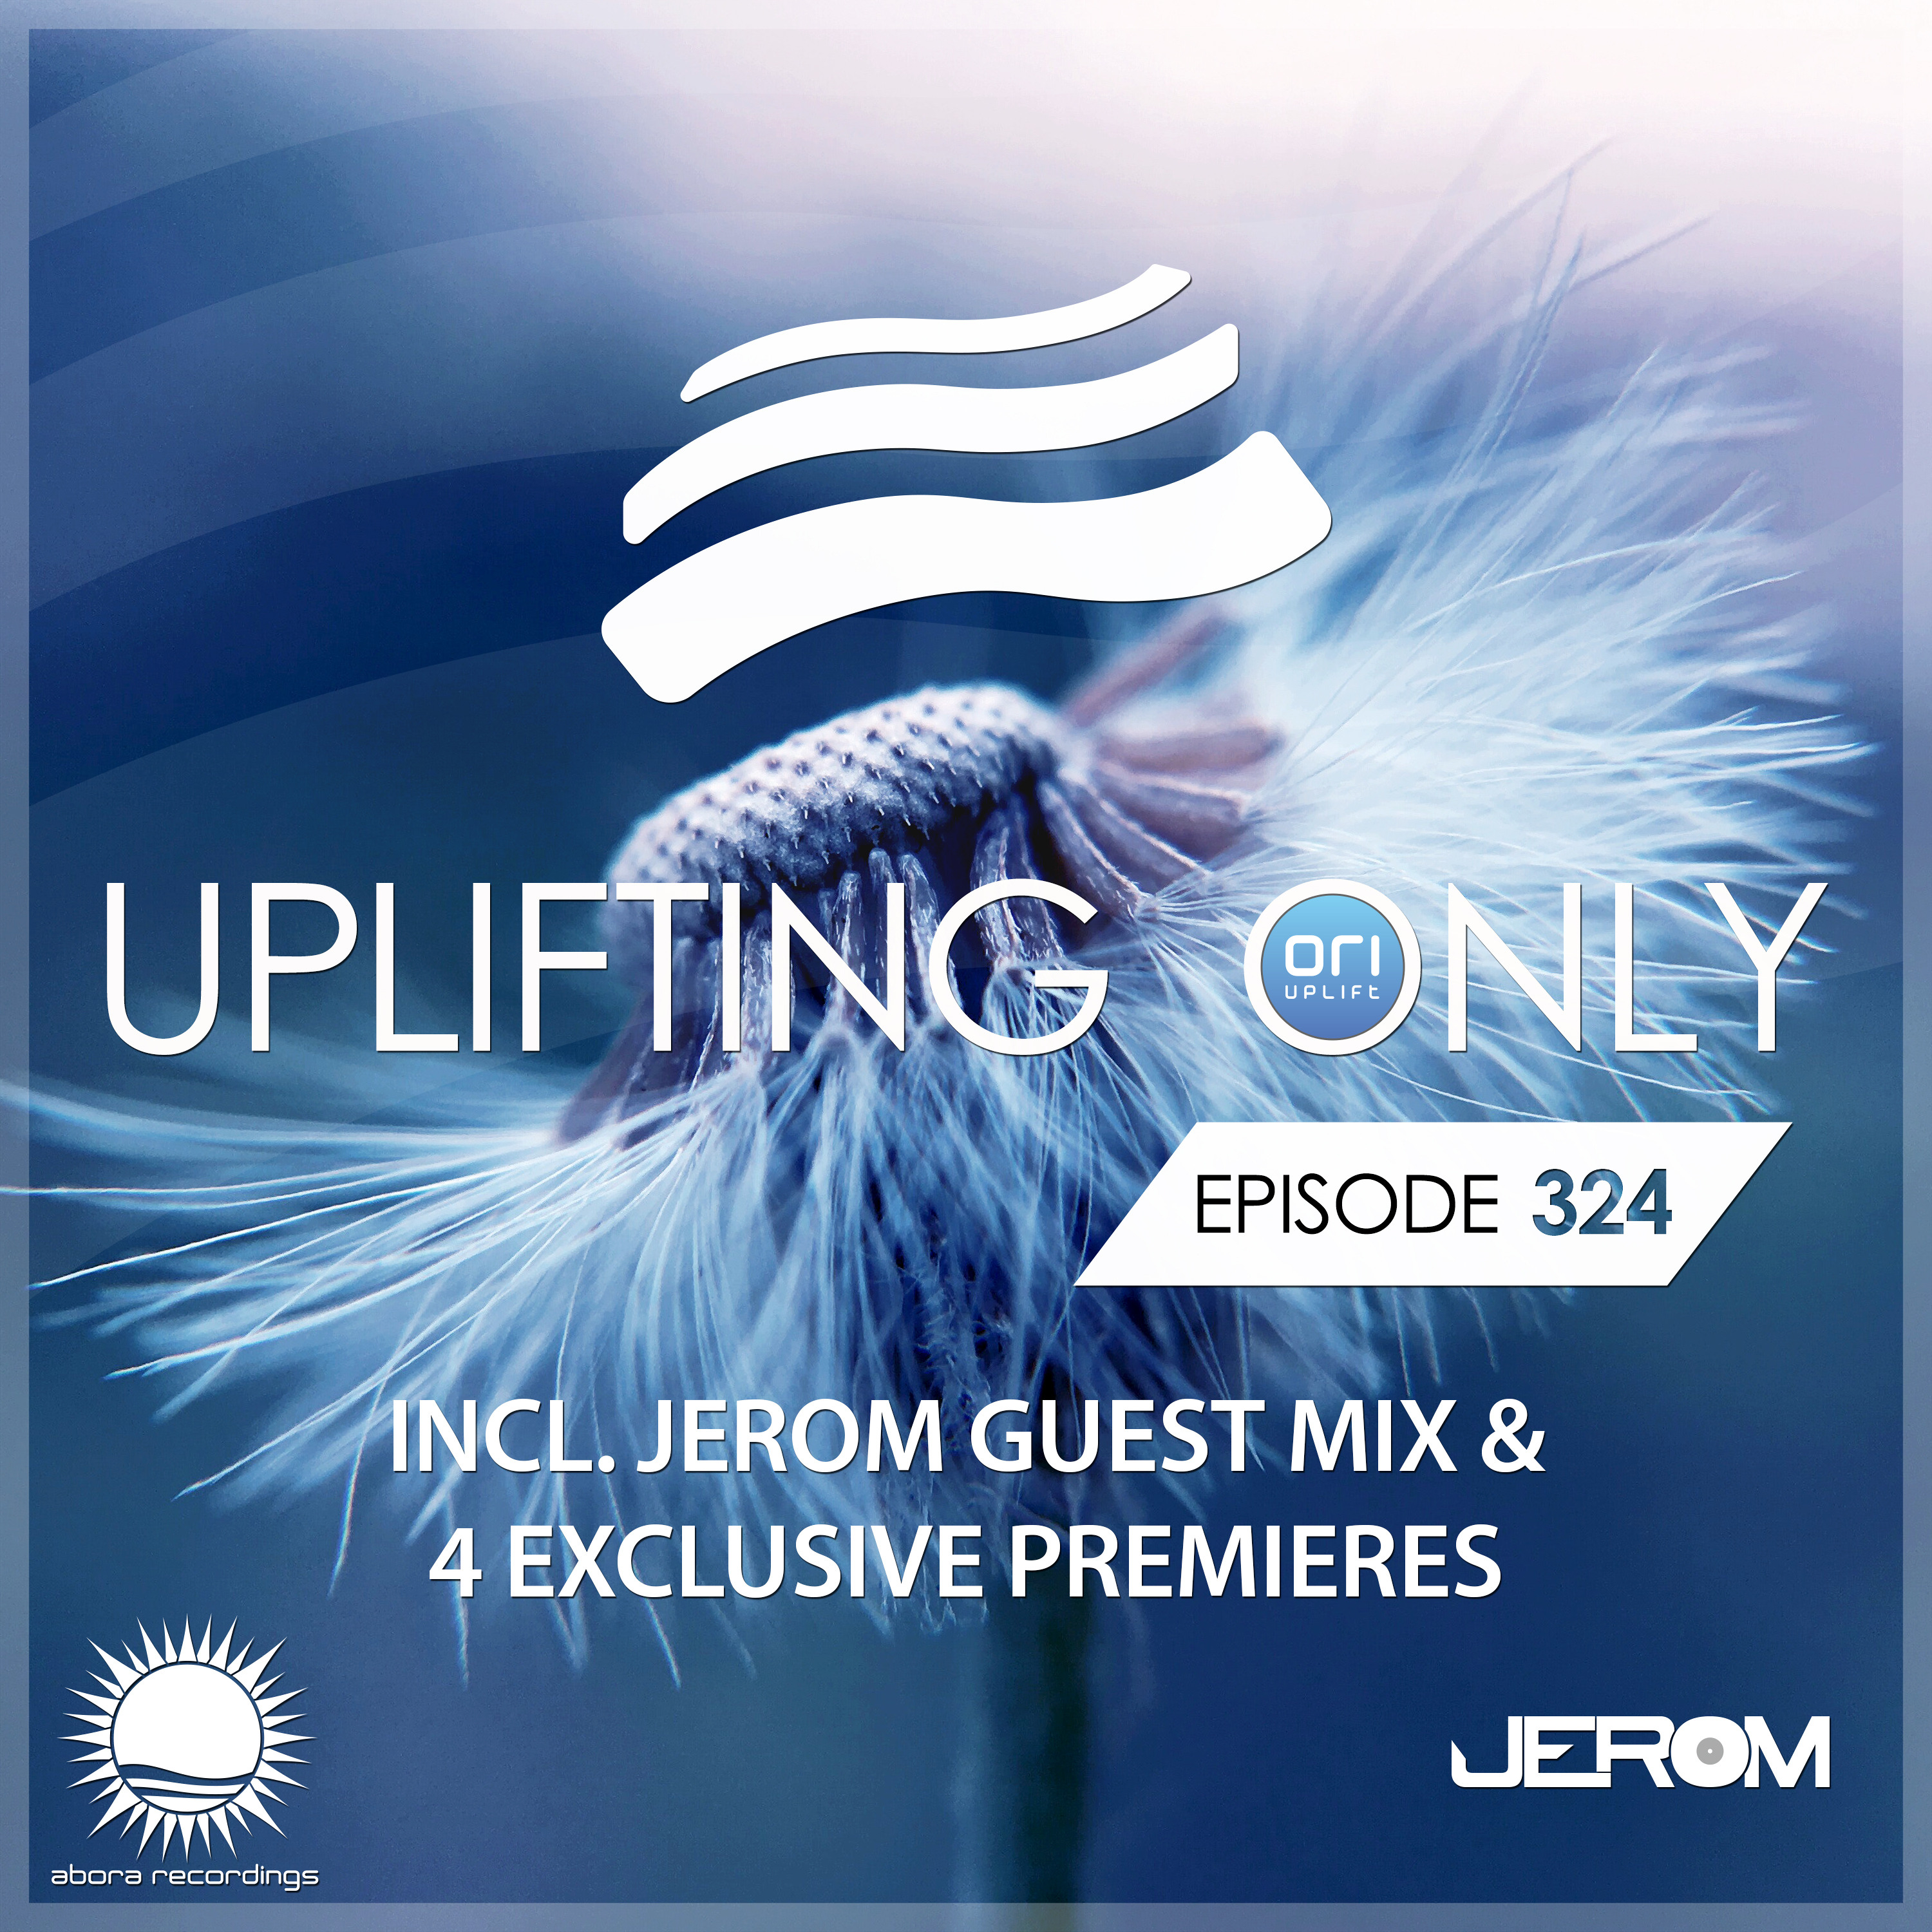 Uplifting Only 324 (incl. Jerom Guestmix) (April 25, 2019) [All Instrumental]